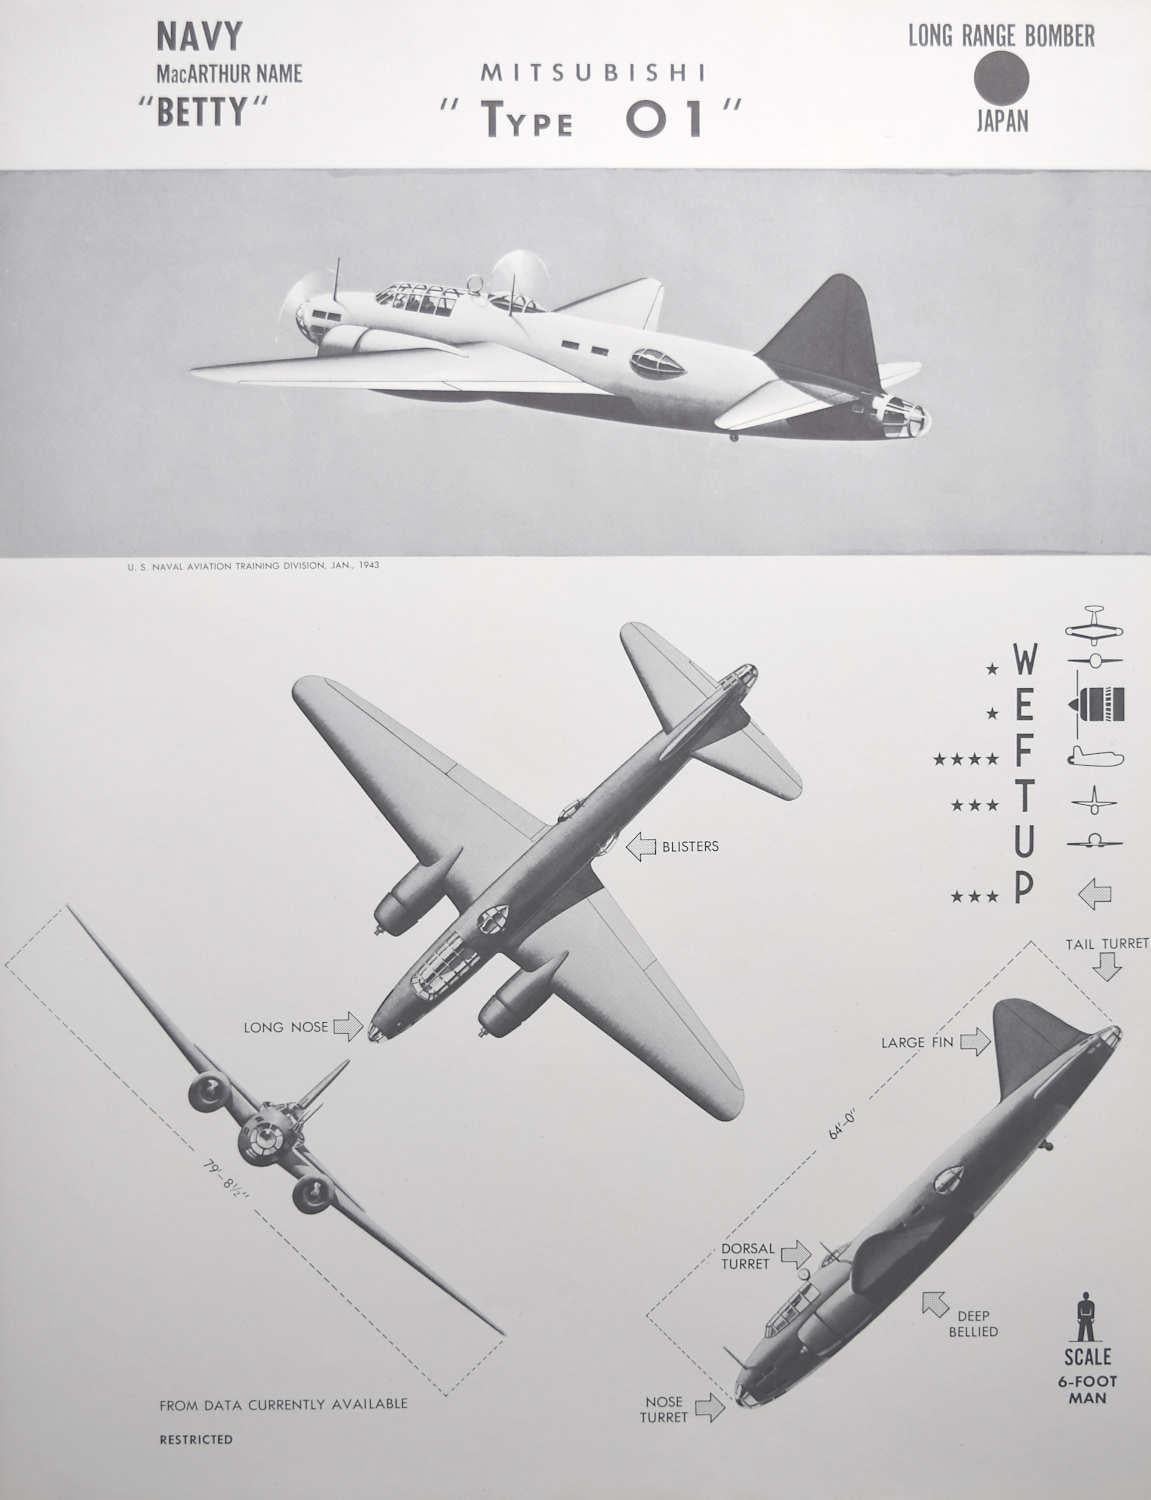 1943 Mitsubishi "Type 01" Japanese bomber plane identification poster WW2 - Print by Unknown